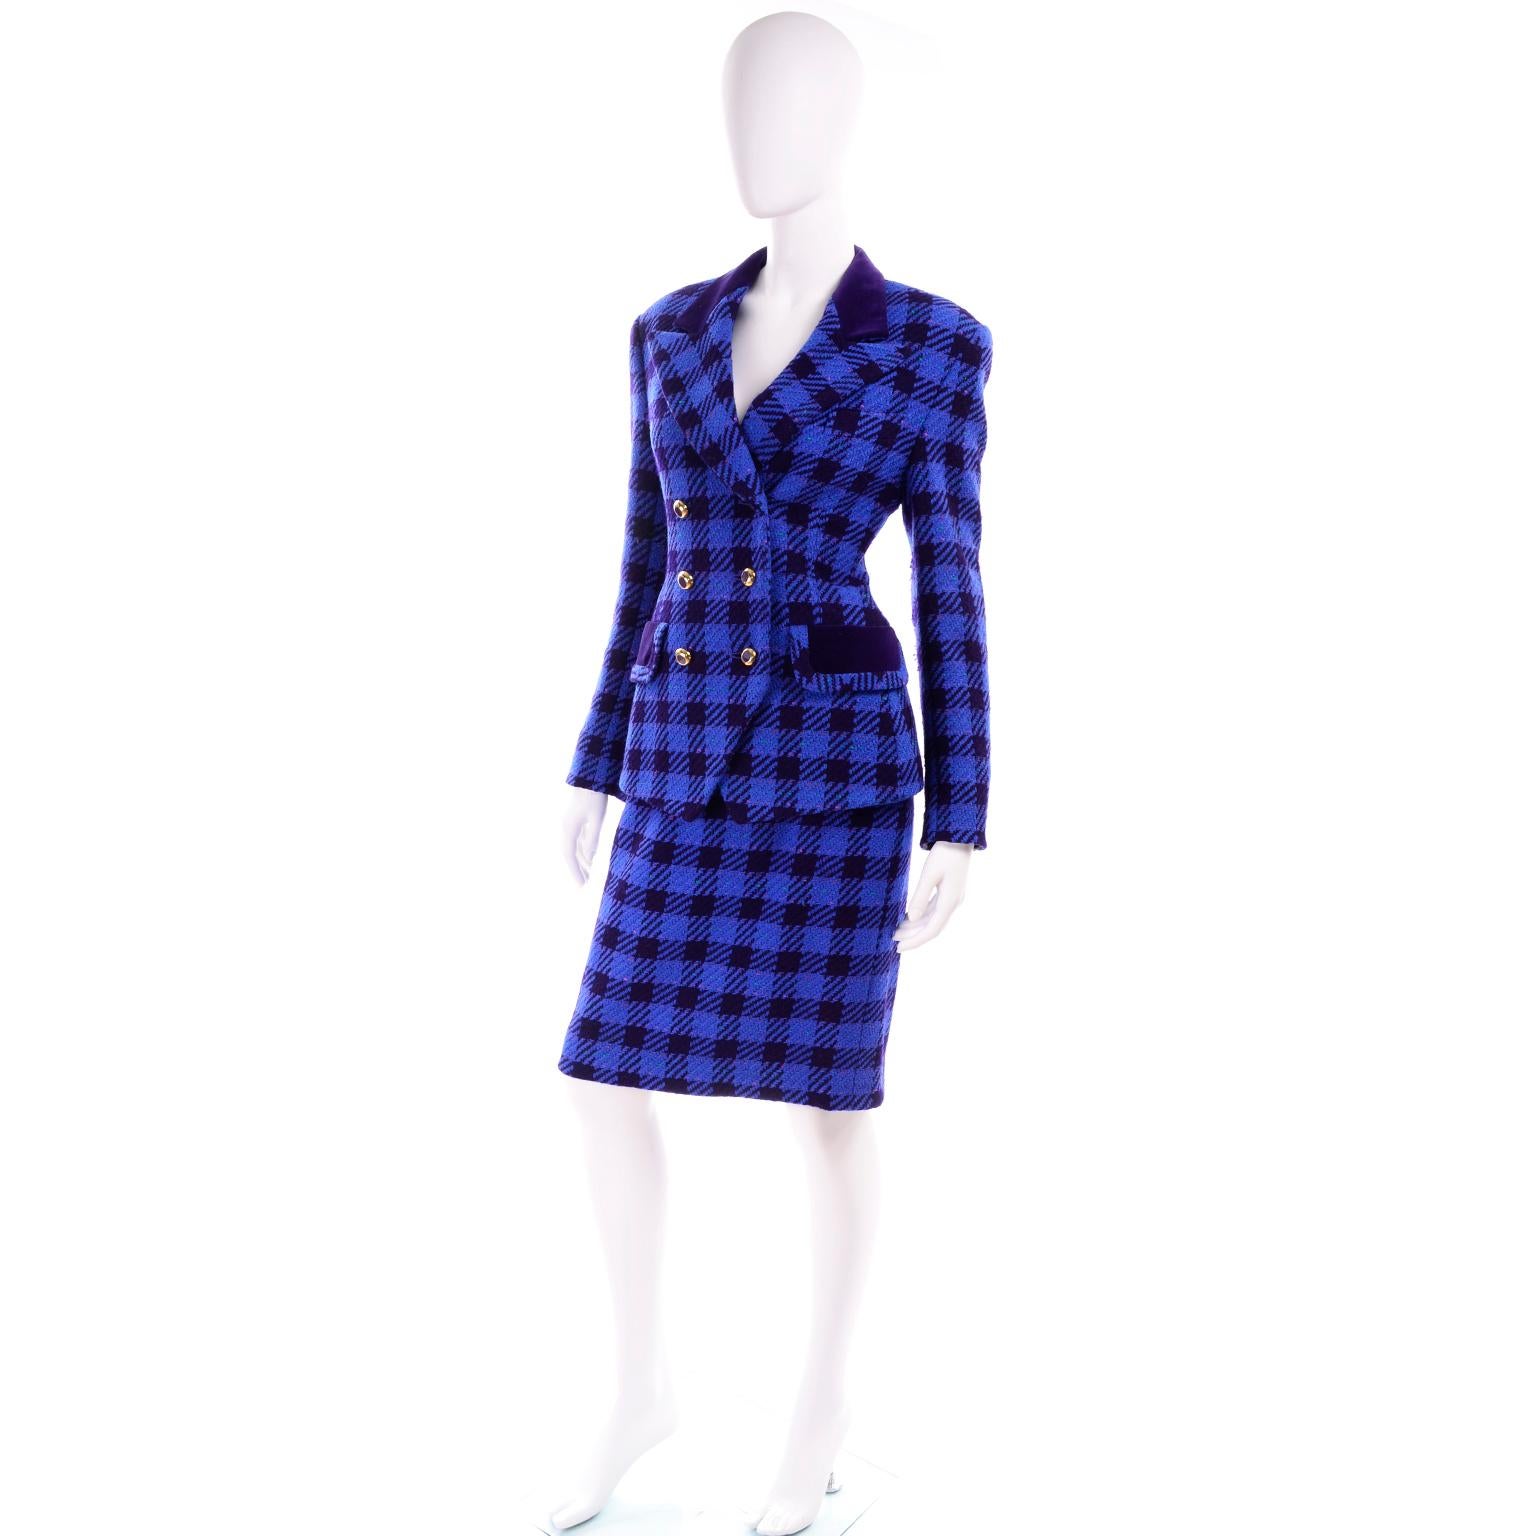 This vintage Escada Electric blue and navy blue plaid skirt suit was made in Germany in the 1980's.  The fully lined suit includes a slim wool skirt and a double breasted wool jacket with purple velvet trim. The suit came with a gorgeous silk blouse